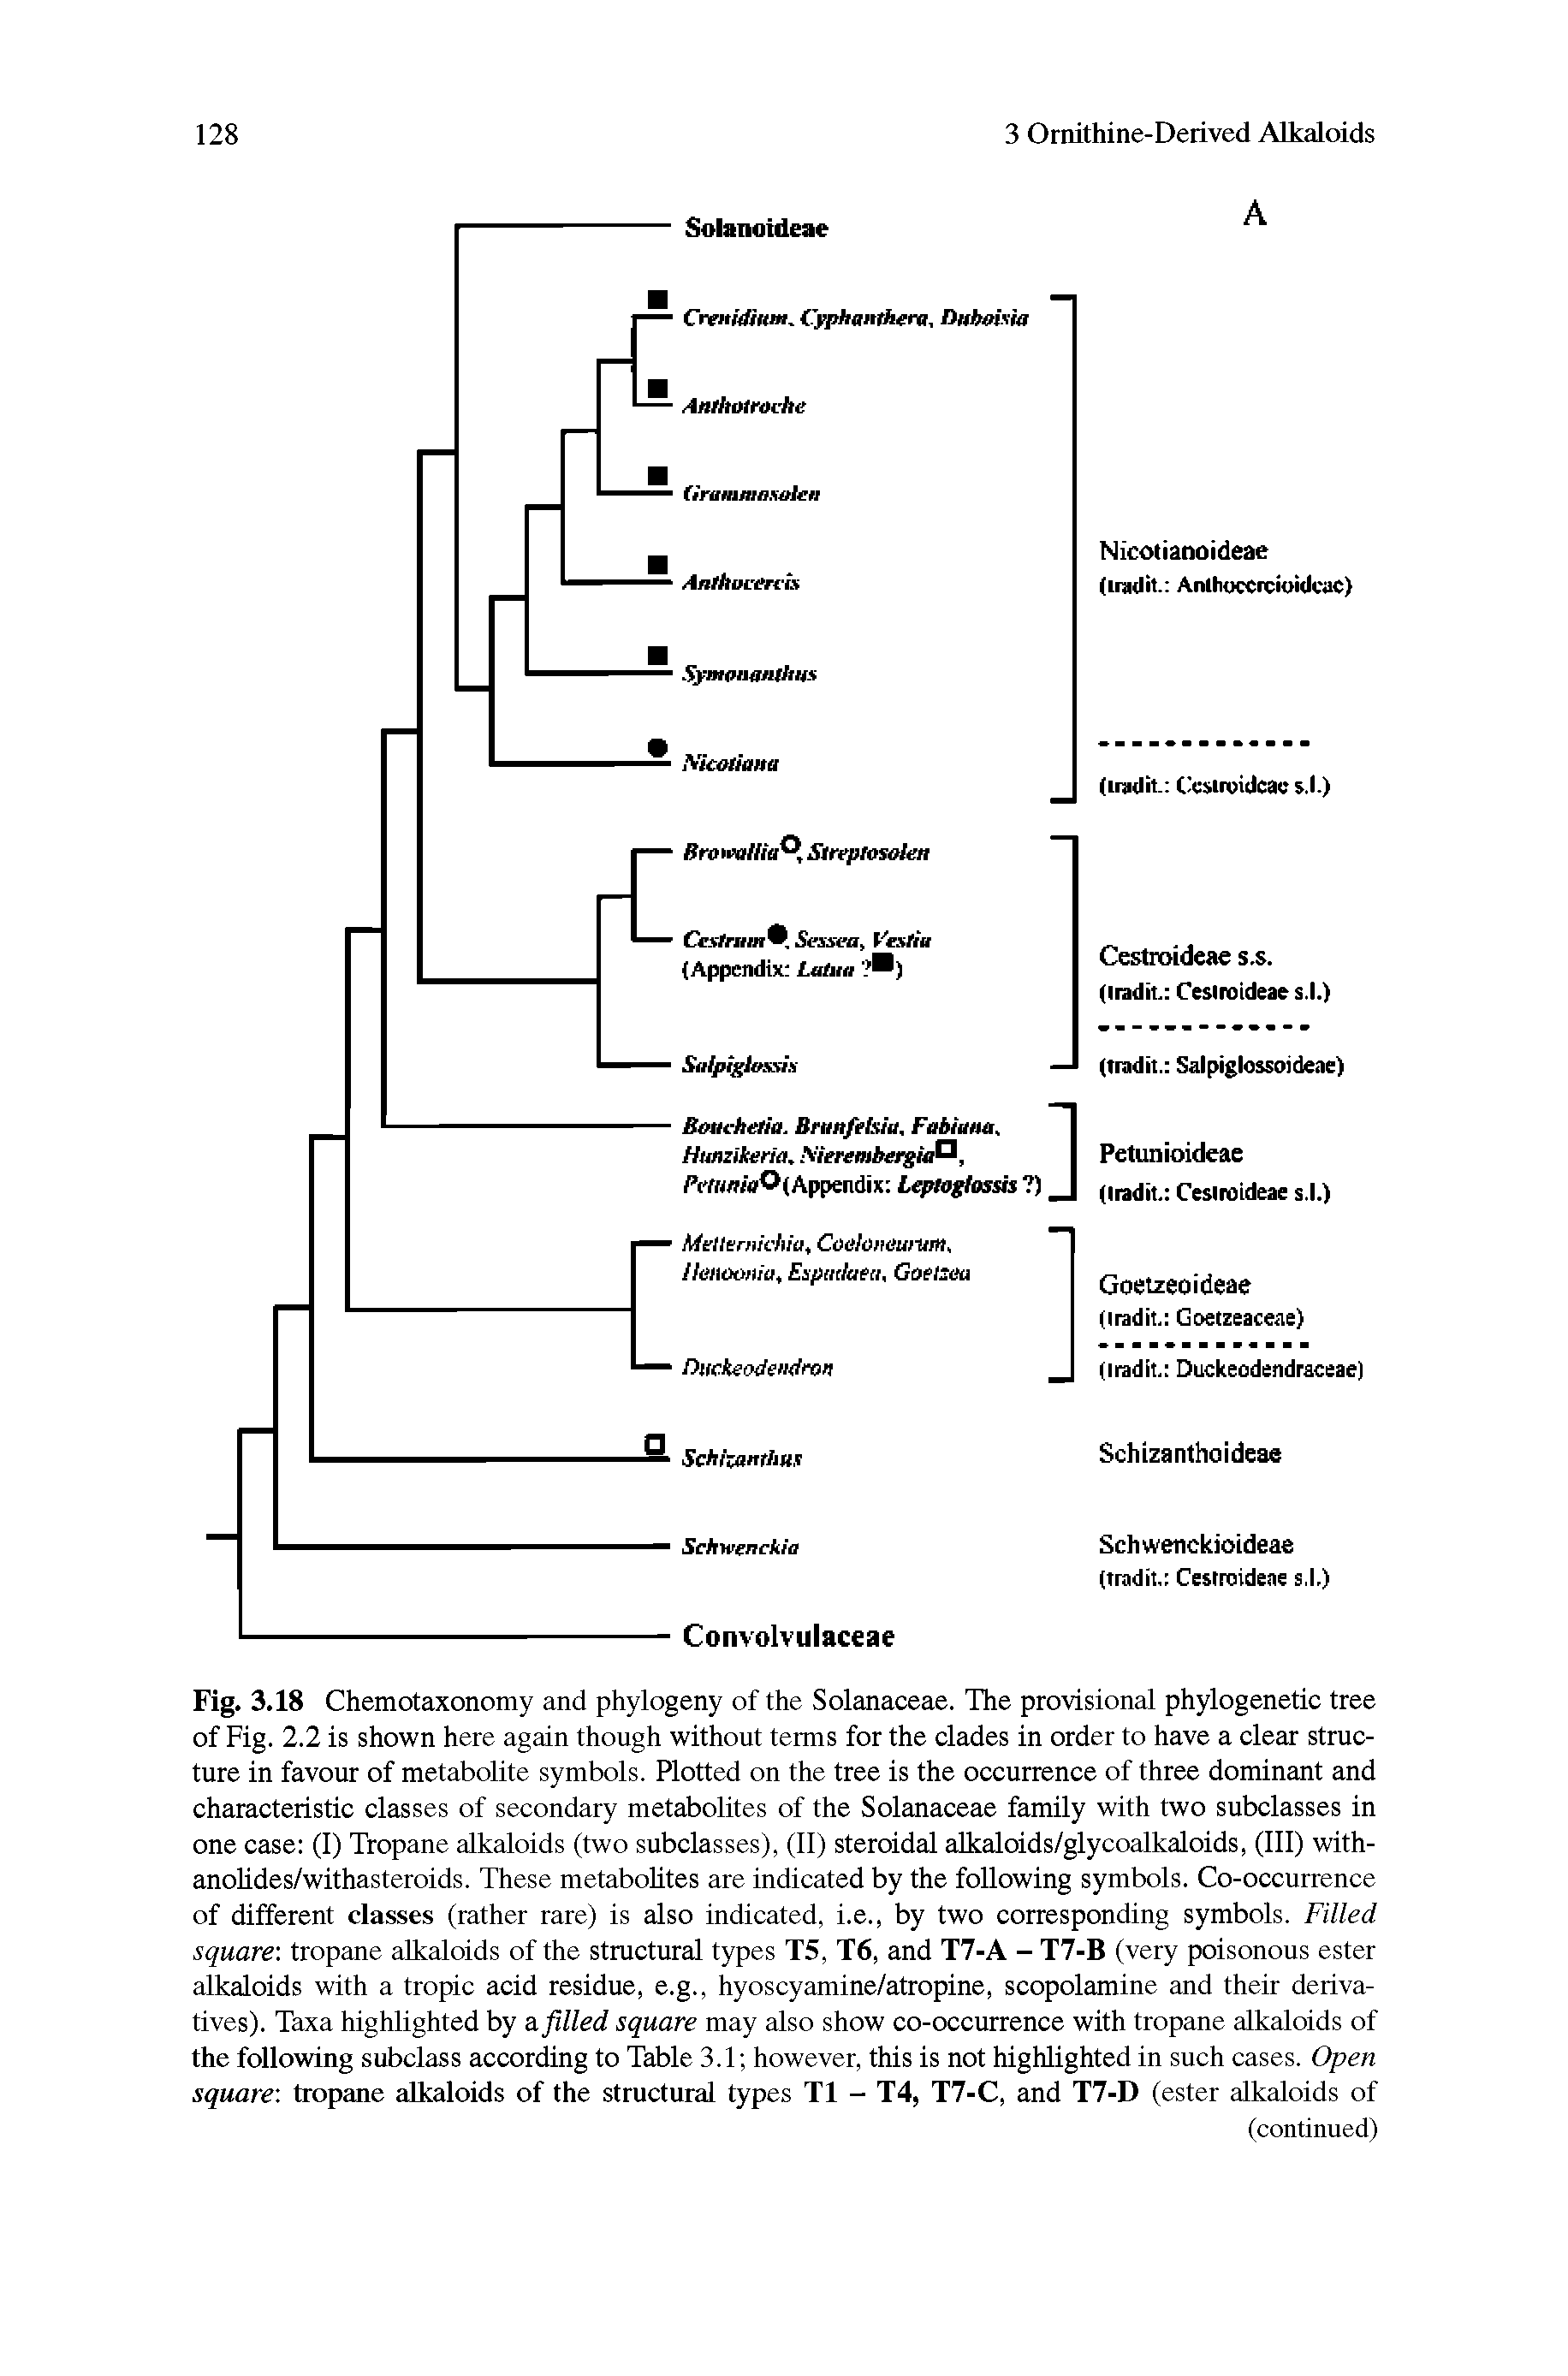 Fig. 3.18 Chemotaxonomy and phylogeny of the Solanaceae. The provisional phylogenetic tree of Fig. 2.2 is shown here again though without terms for the clades in order to have a clear structure in favour of metabolite symbols. Plotted on the tree is the occurrence of three dominant and characteristic classes of secondary metabolites of the Solanaceae family with two subclasses in one case (I) Tropane alkaloids (two subclasses), (11) steroidal alkaloids/glycoalkaloids, (III) with-anoUdes/withasteroids. These metabolites are indicated by the following symbols. Co-occurrence of different classes (rather rare) is also indicated, i.e., by two corresponding symbols. Filled square tropane alkaloids of the structural types T5, T6, and T7-A - T7-B (very poisonous ester alkaloids with a tropic acid residue, e.g., hyoscyamine/atropine, scopolamine and their derivatives). Taxa highlighted by dt filled square may also show co-occurrence with tropane alkaloids of the following subclass according to Table 3.1 however, this is not highlighted in such cases. Open square tropane alkaloids of the structural types T1 - T4, T7-C, and T7-D (ester alkaloids of...